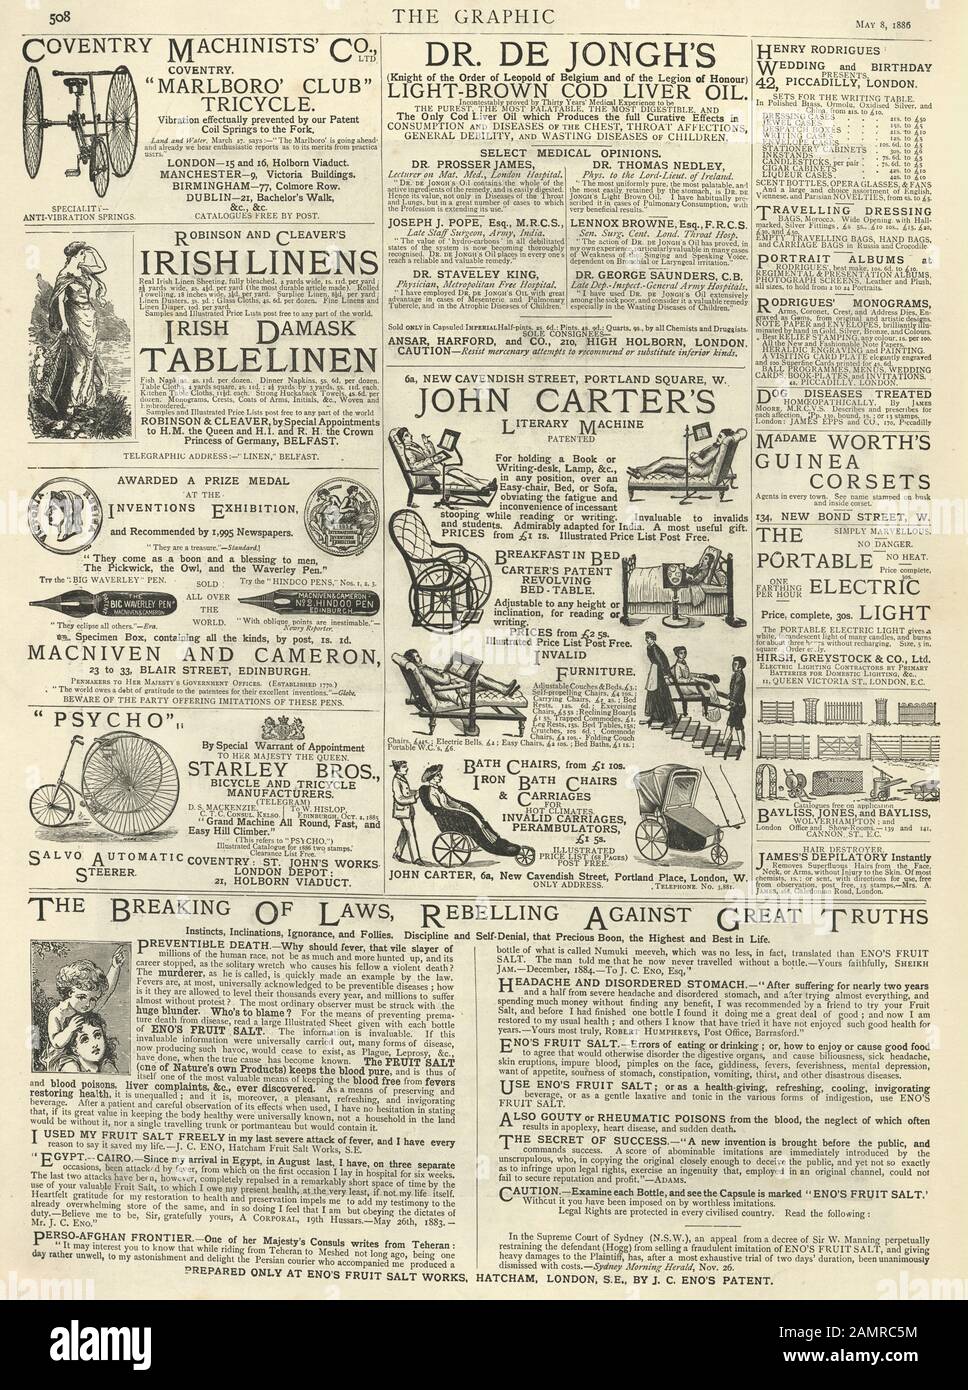 Page of newspaper adverts from the Graphic illustrated newspaper, 1886. Irish linens, wheel chairs, tricycles, invalid furnitrue Stock Photo